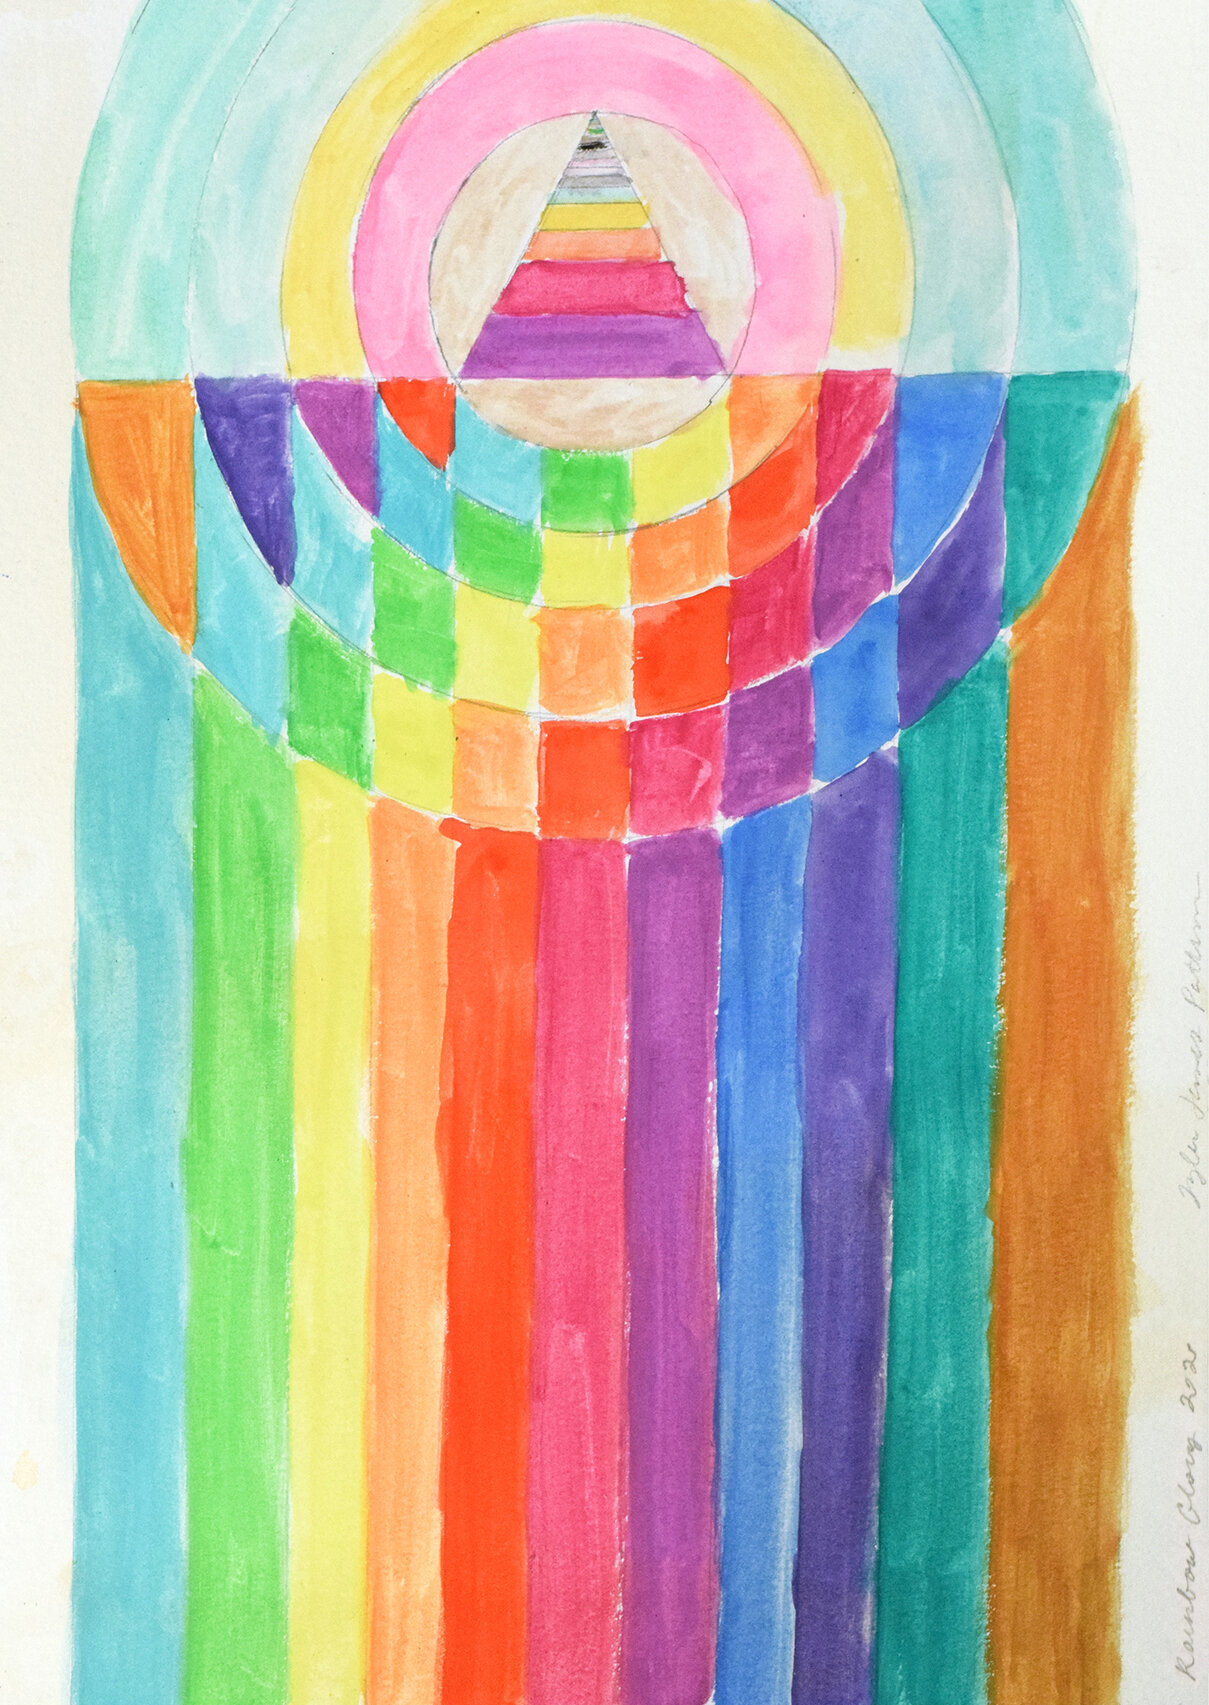 Gravity Rainbow, 2020, watercolor on paper, 9 x 12 in.